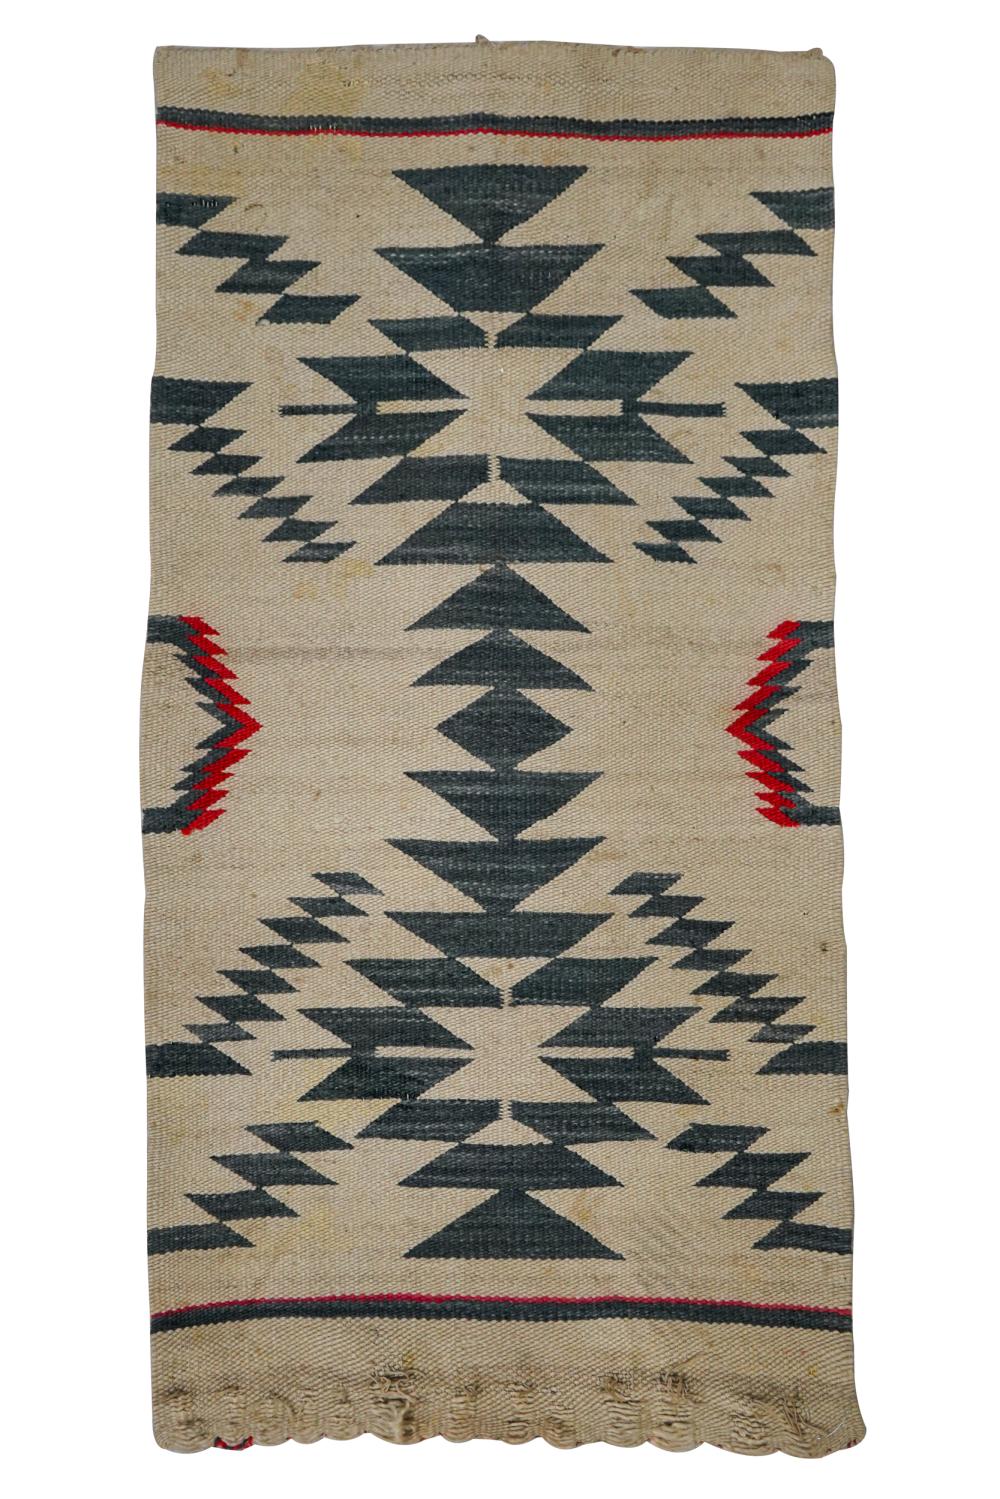 NAVAJO WOOL GALLUP THROWred and